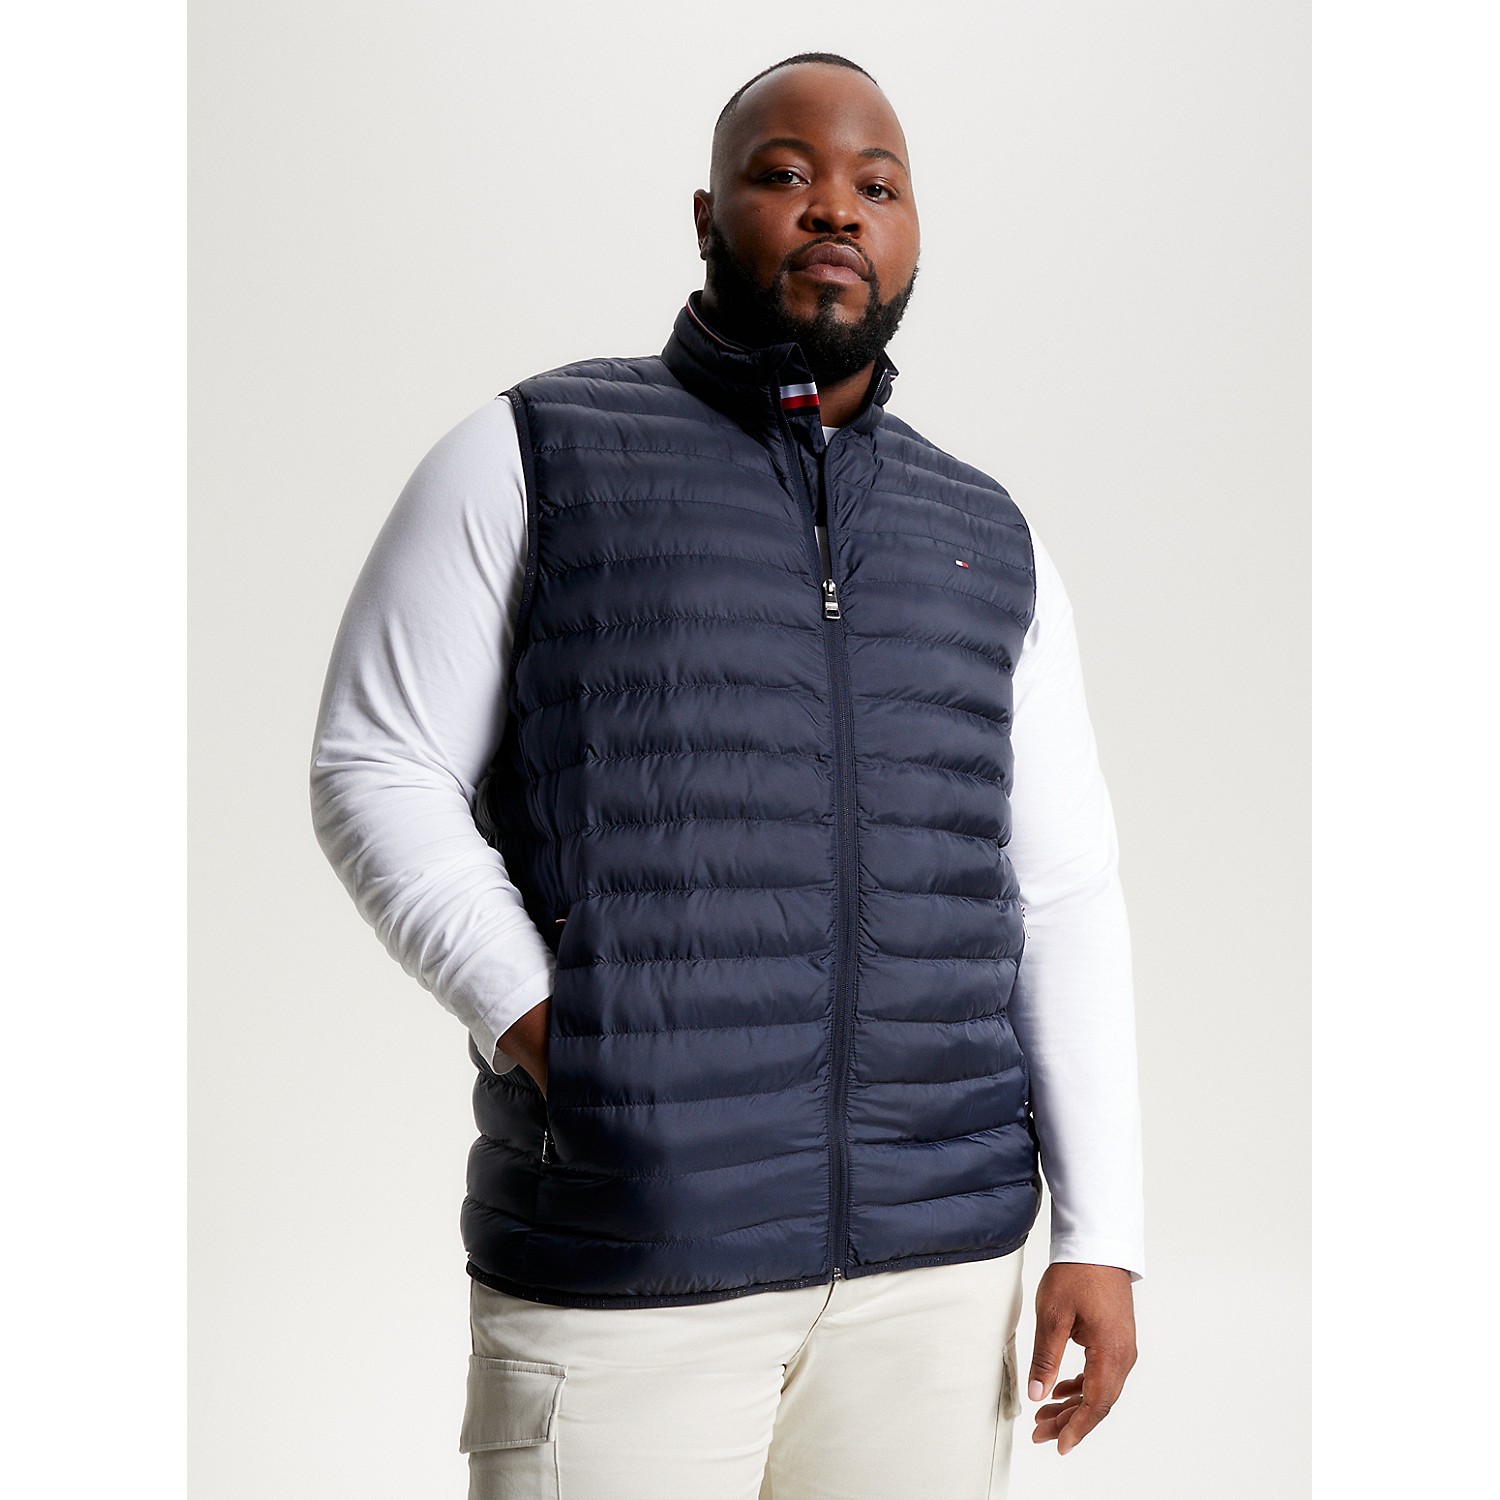 TOMMY HILFIGER Big and Tall Recycled Packable Vest